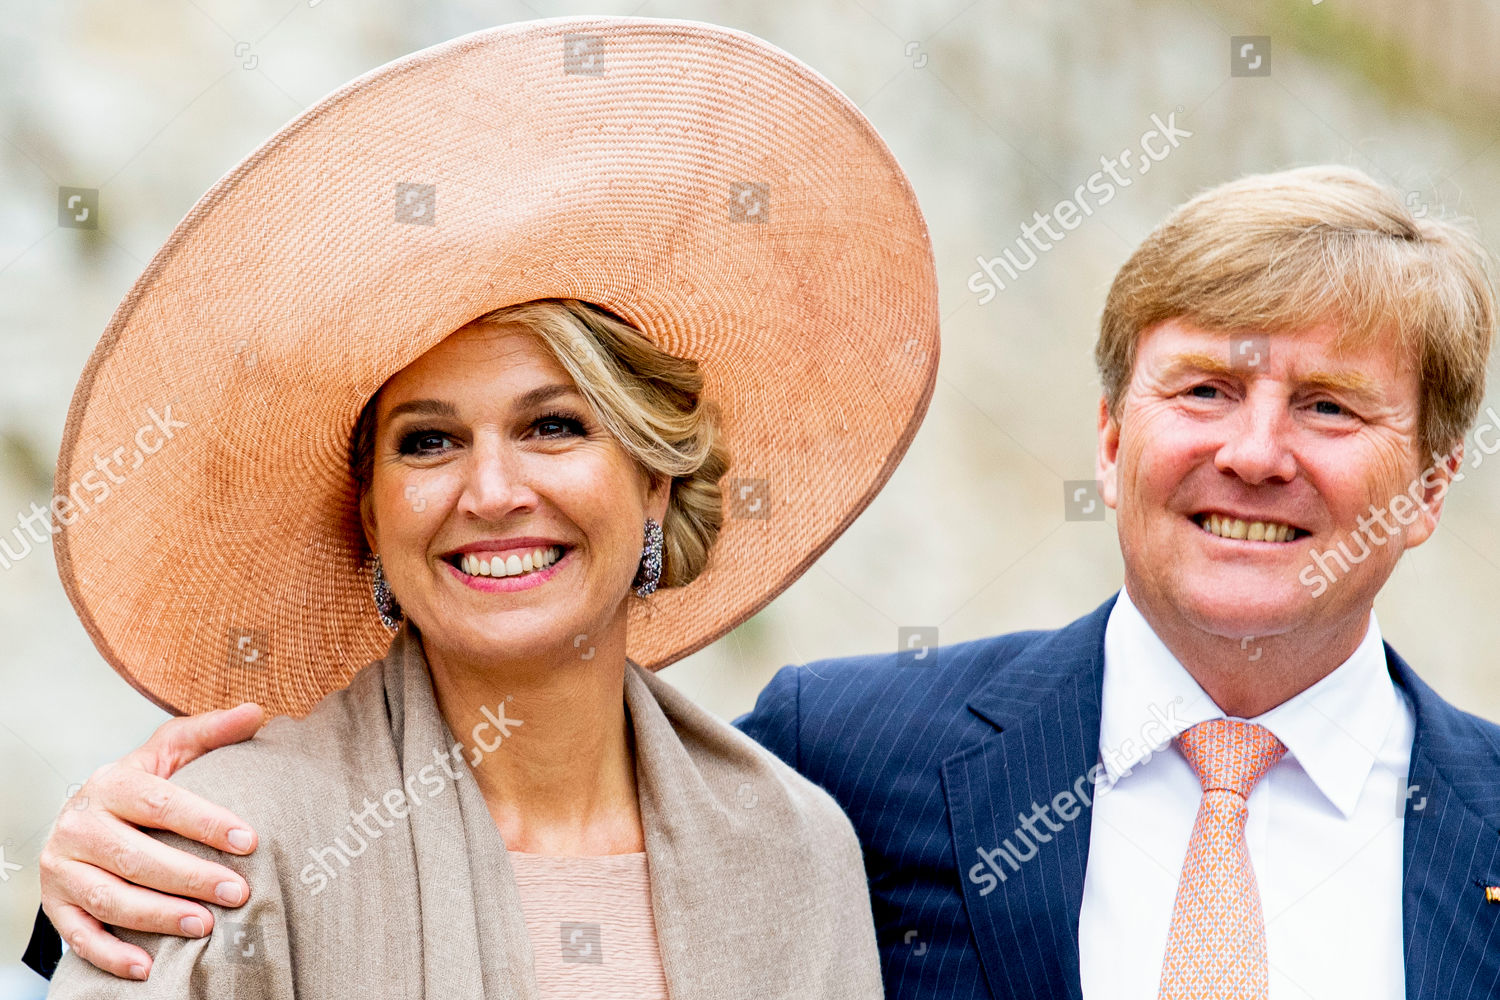 king-willem-alexander-and-queen-maxima-visit-to-germany-shutterstock-editorial-10243489cq.jpg